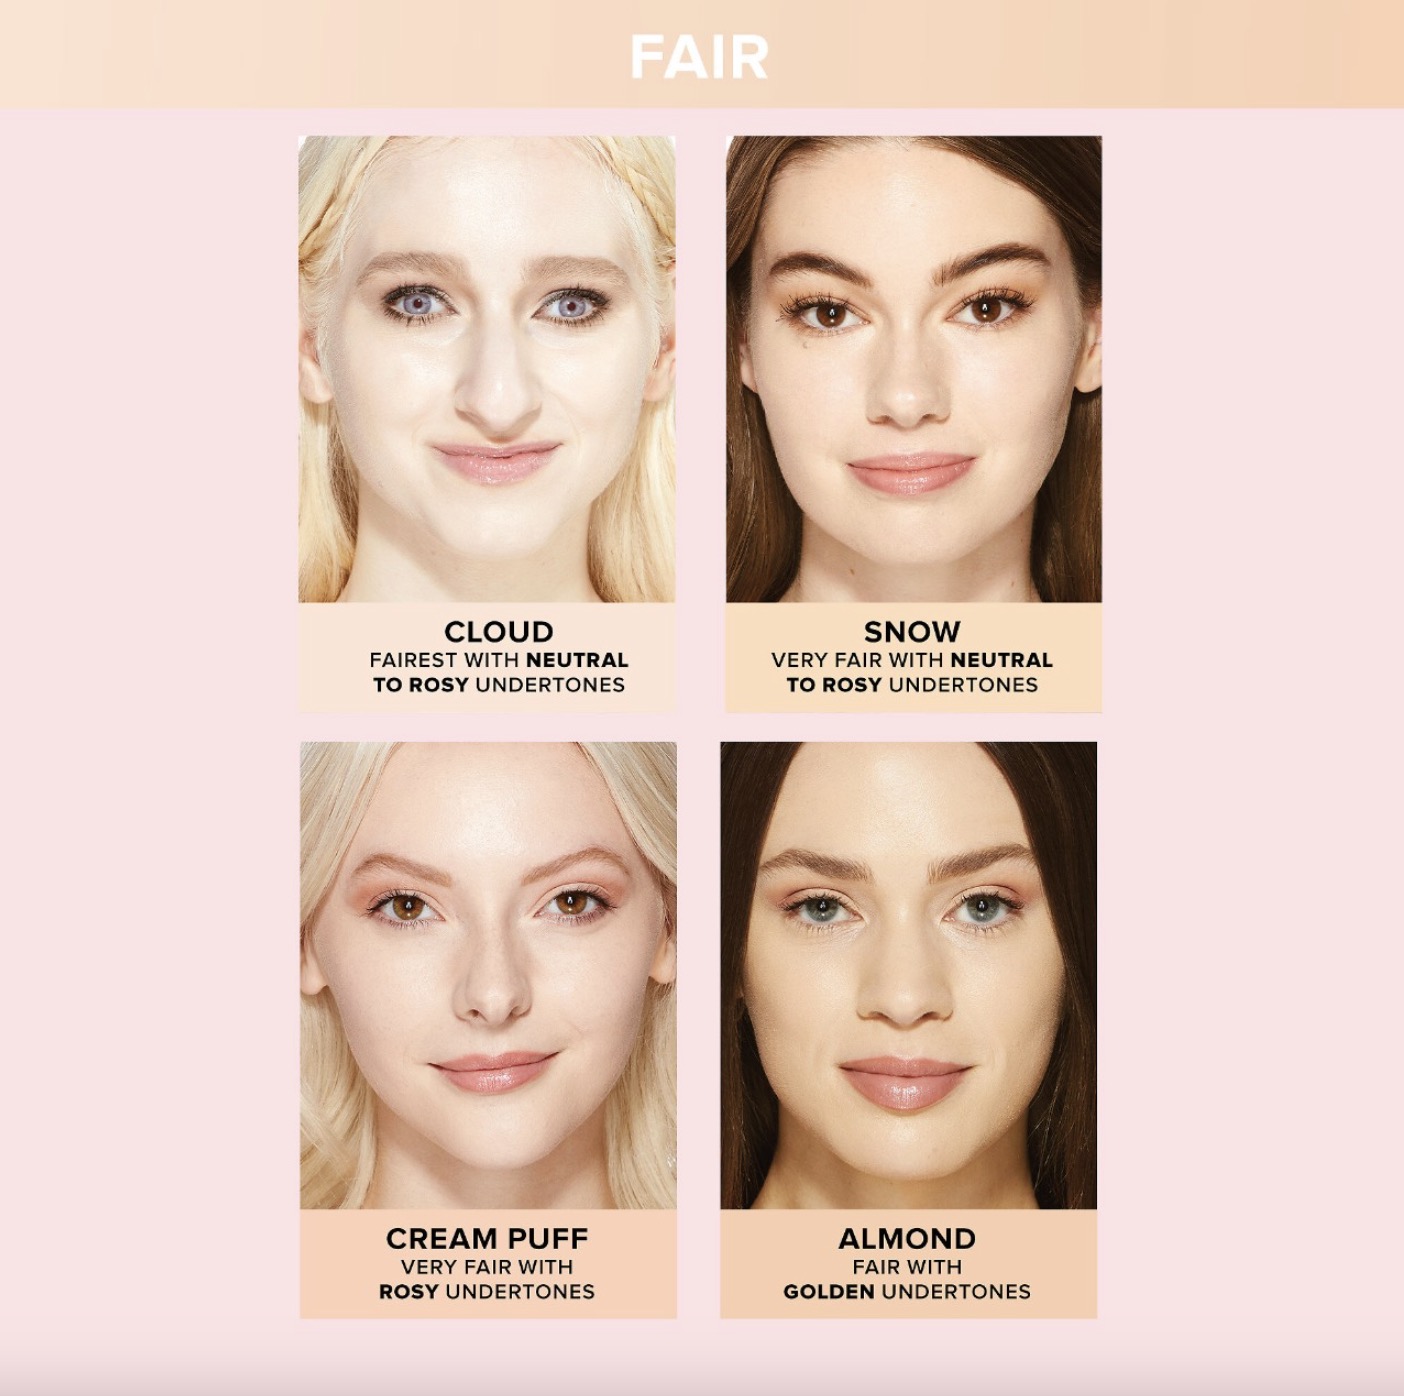 Too Faced Born This Way Healthy Glow Spf 30 Moisturizing Skin Tint